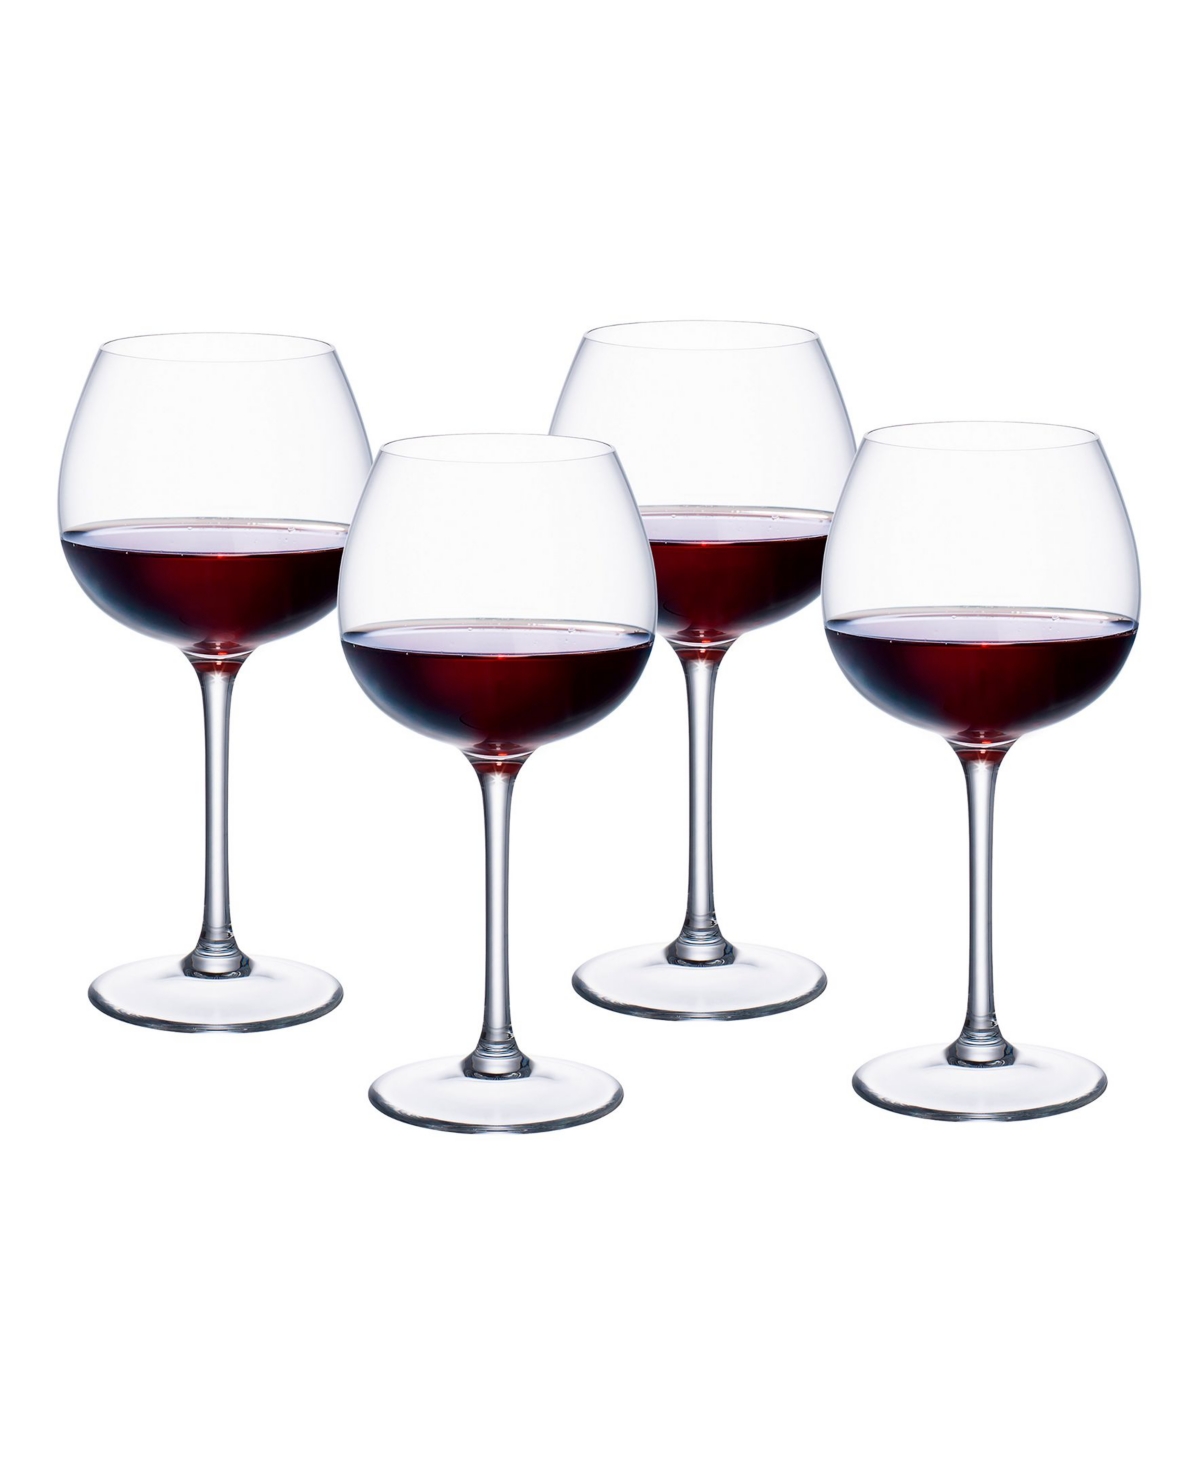 1035658 Villeroy & Boch Purismo Red Wine Full Bodied Glass sku 1035658